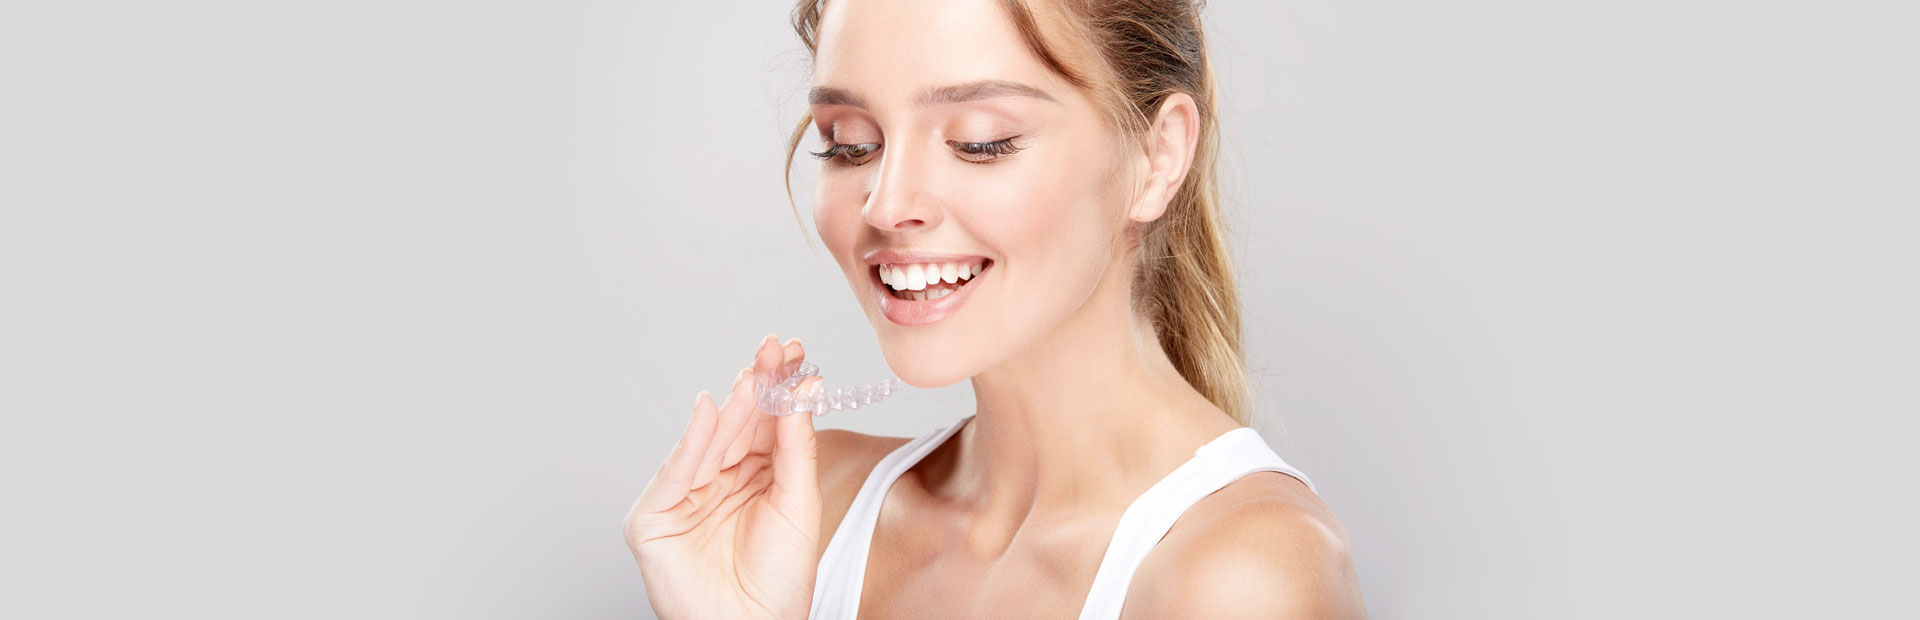 Are You the Right Candidate for Invisalign?